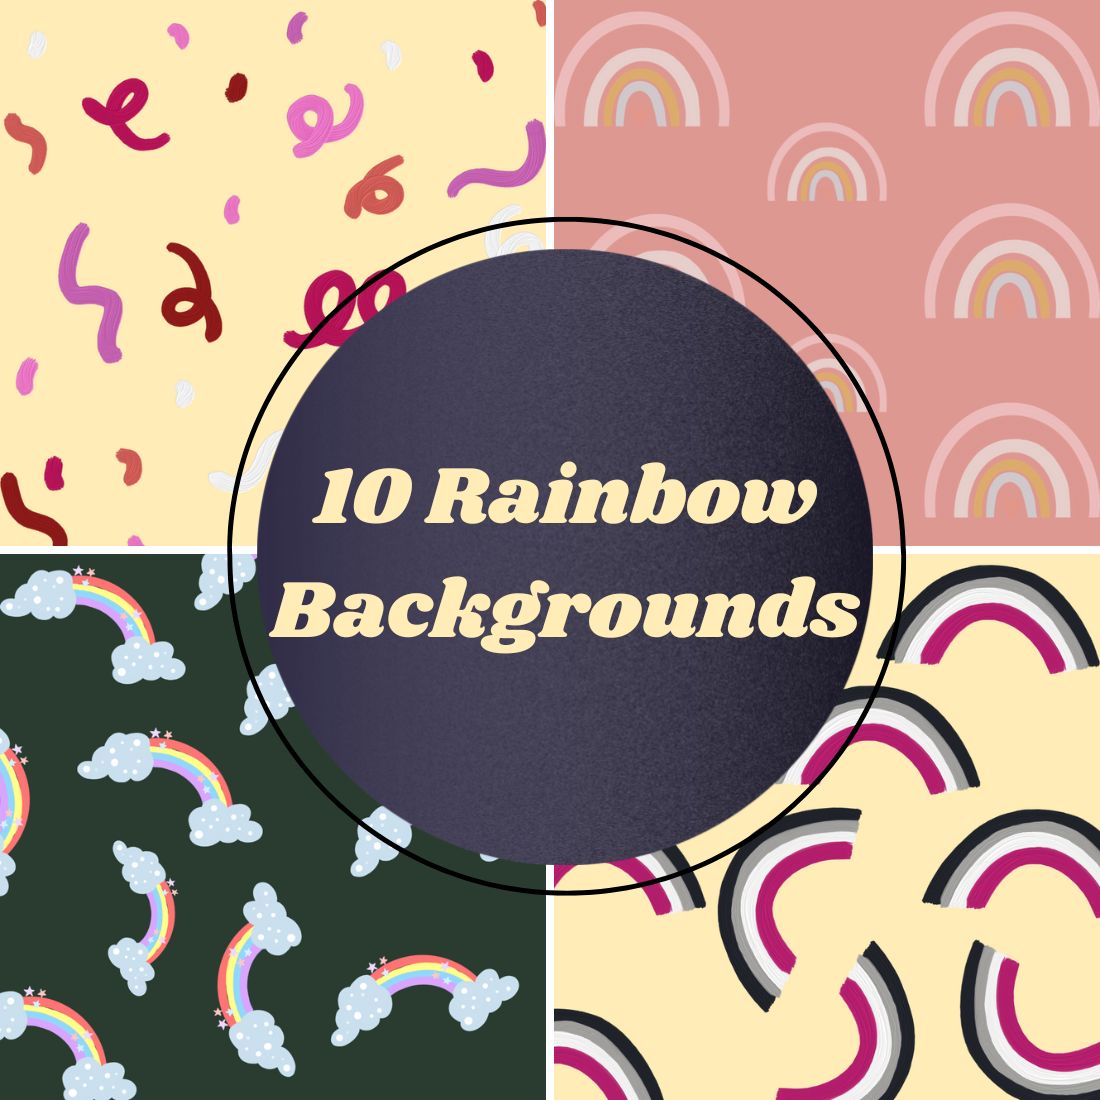 Rainbow Backgrounds Design Graphics cover image.